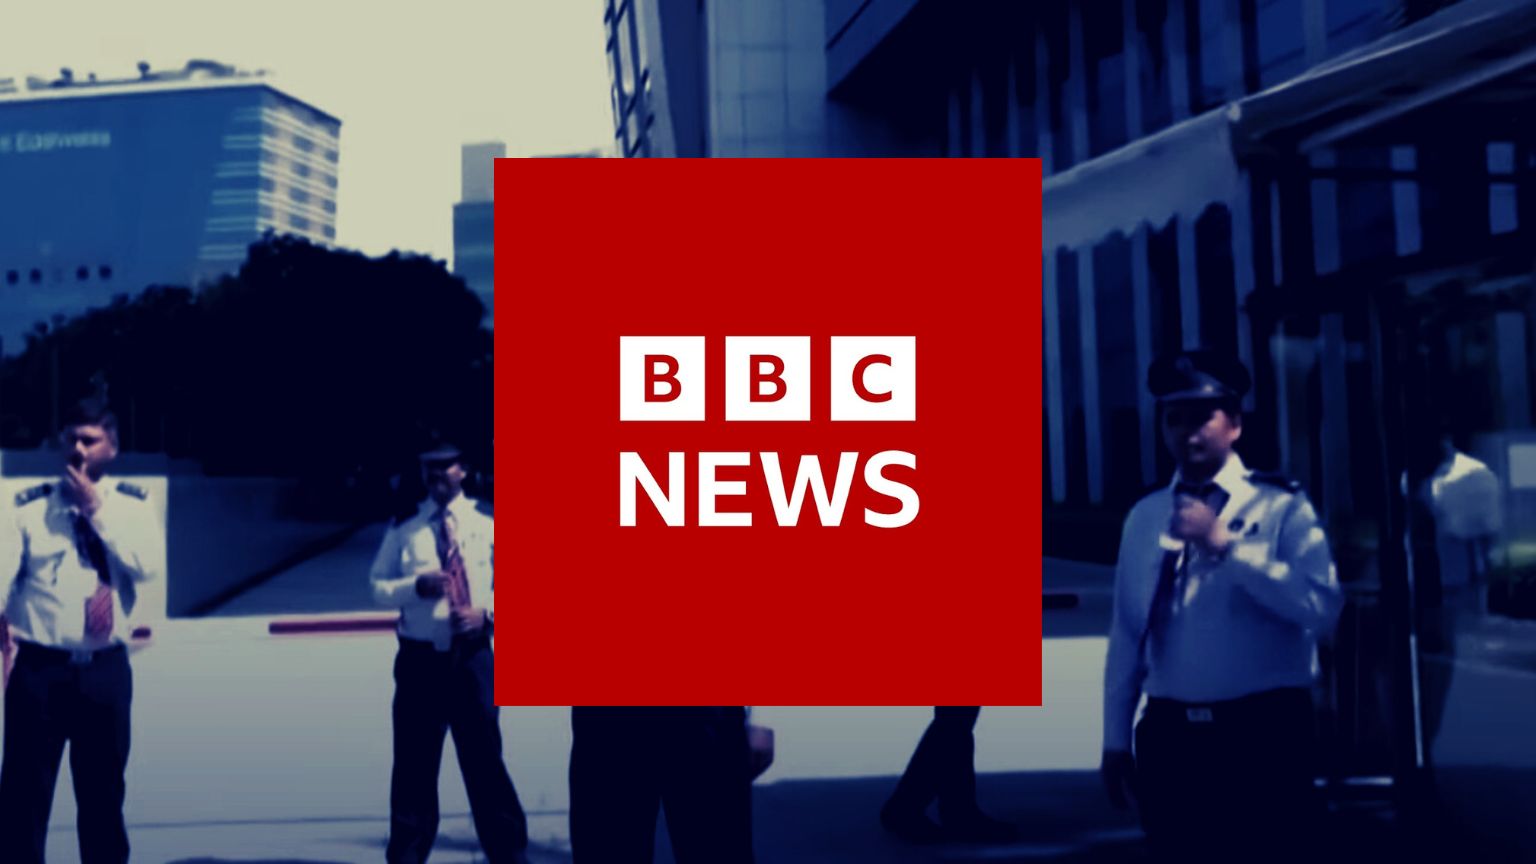 BBC is raided in India, leading to allegations of retaliation over documentary critical of Modi